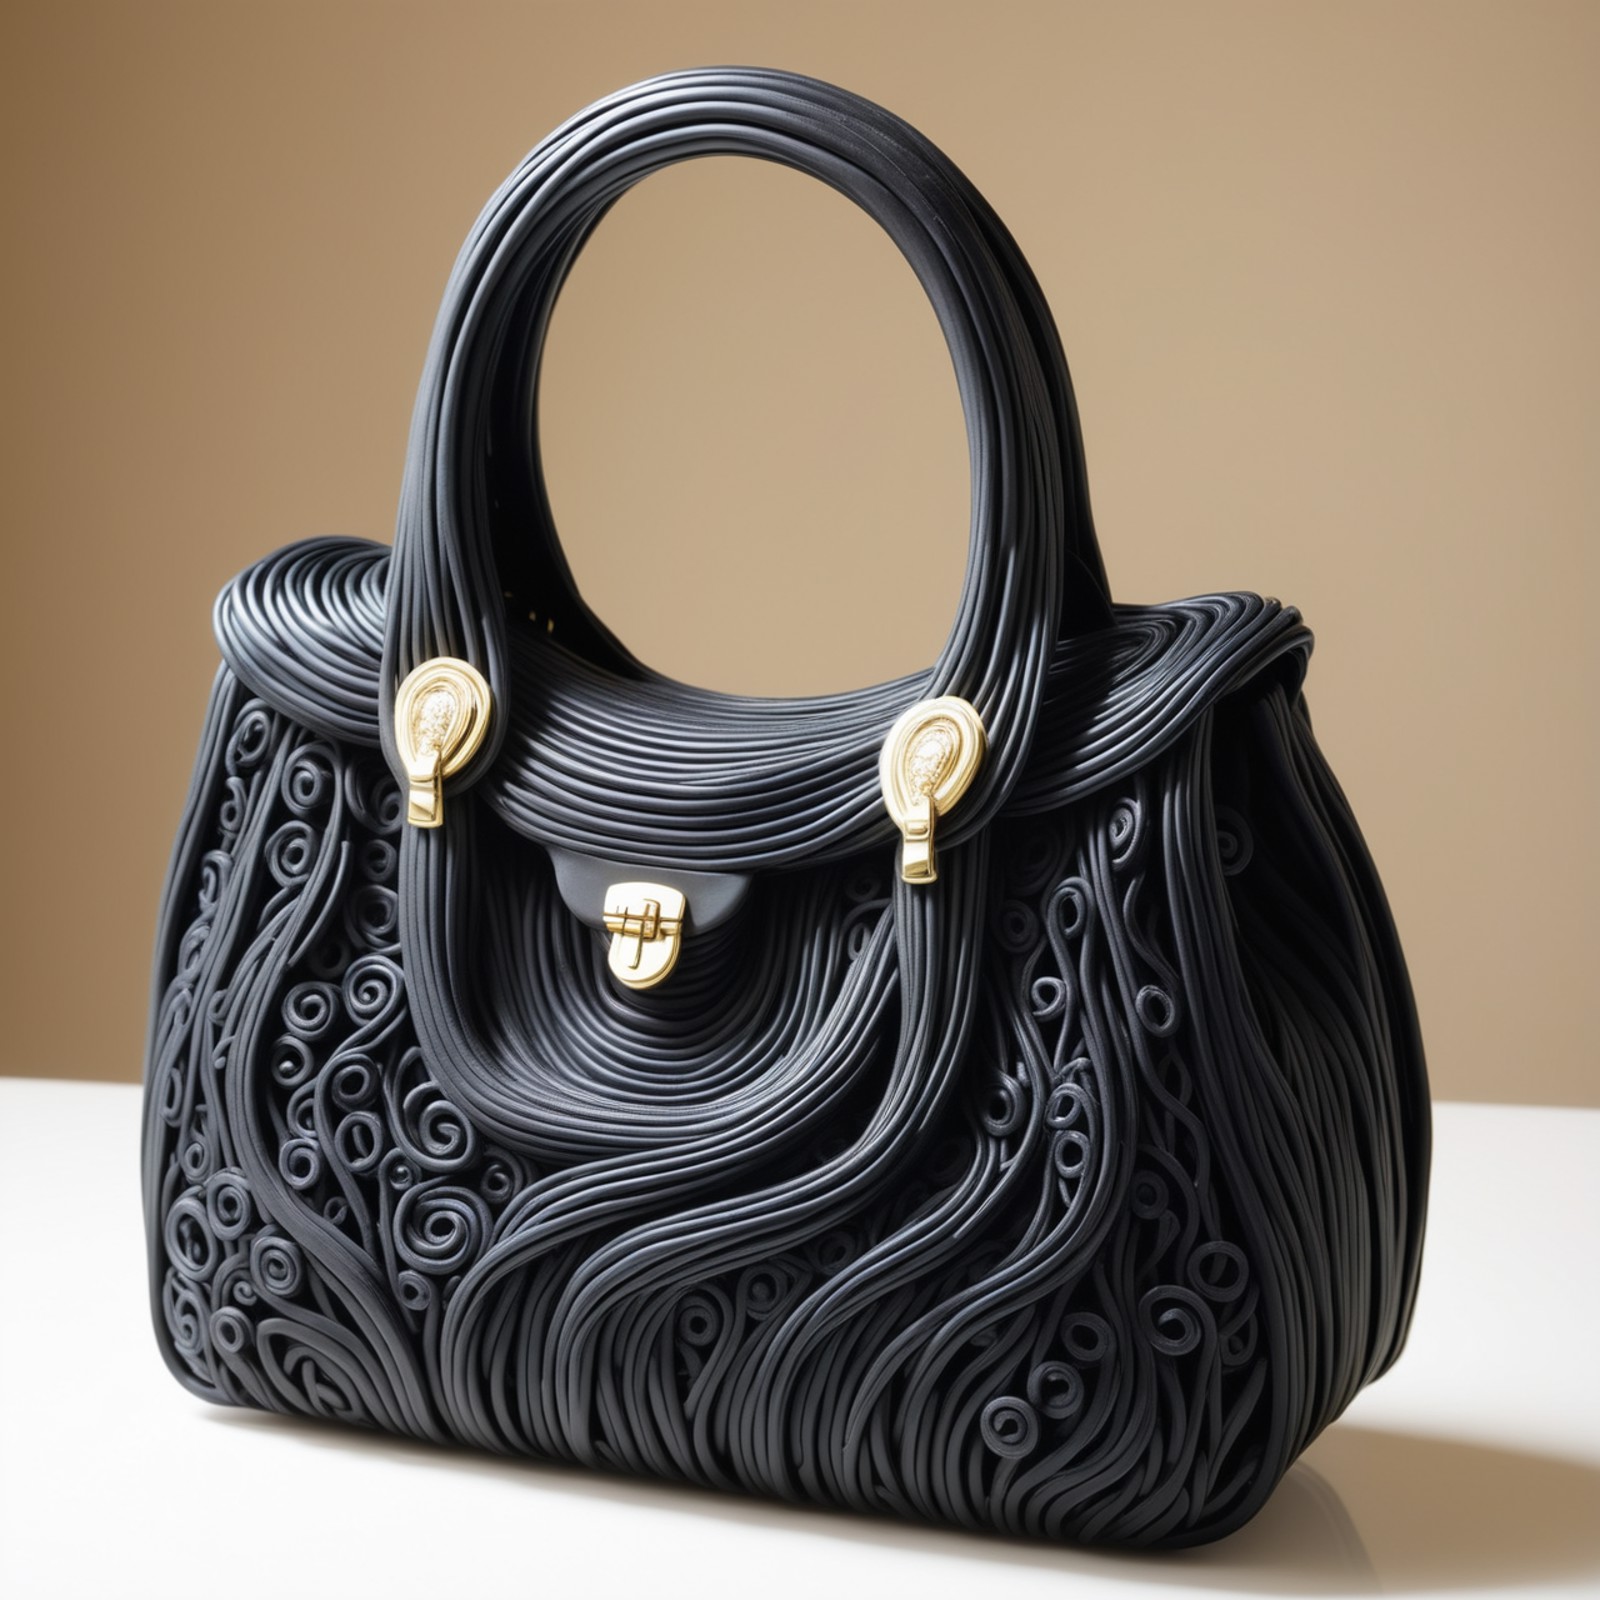 A handbag with an intricate design made up of swirling black strands. The handbag features gold-colored hardware accents and stands against a neutral background that contrasts with its dark color. 